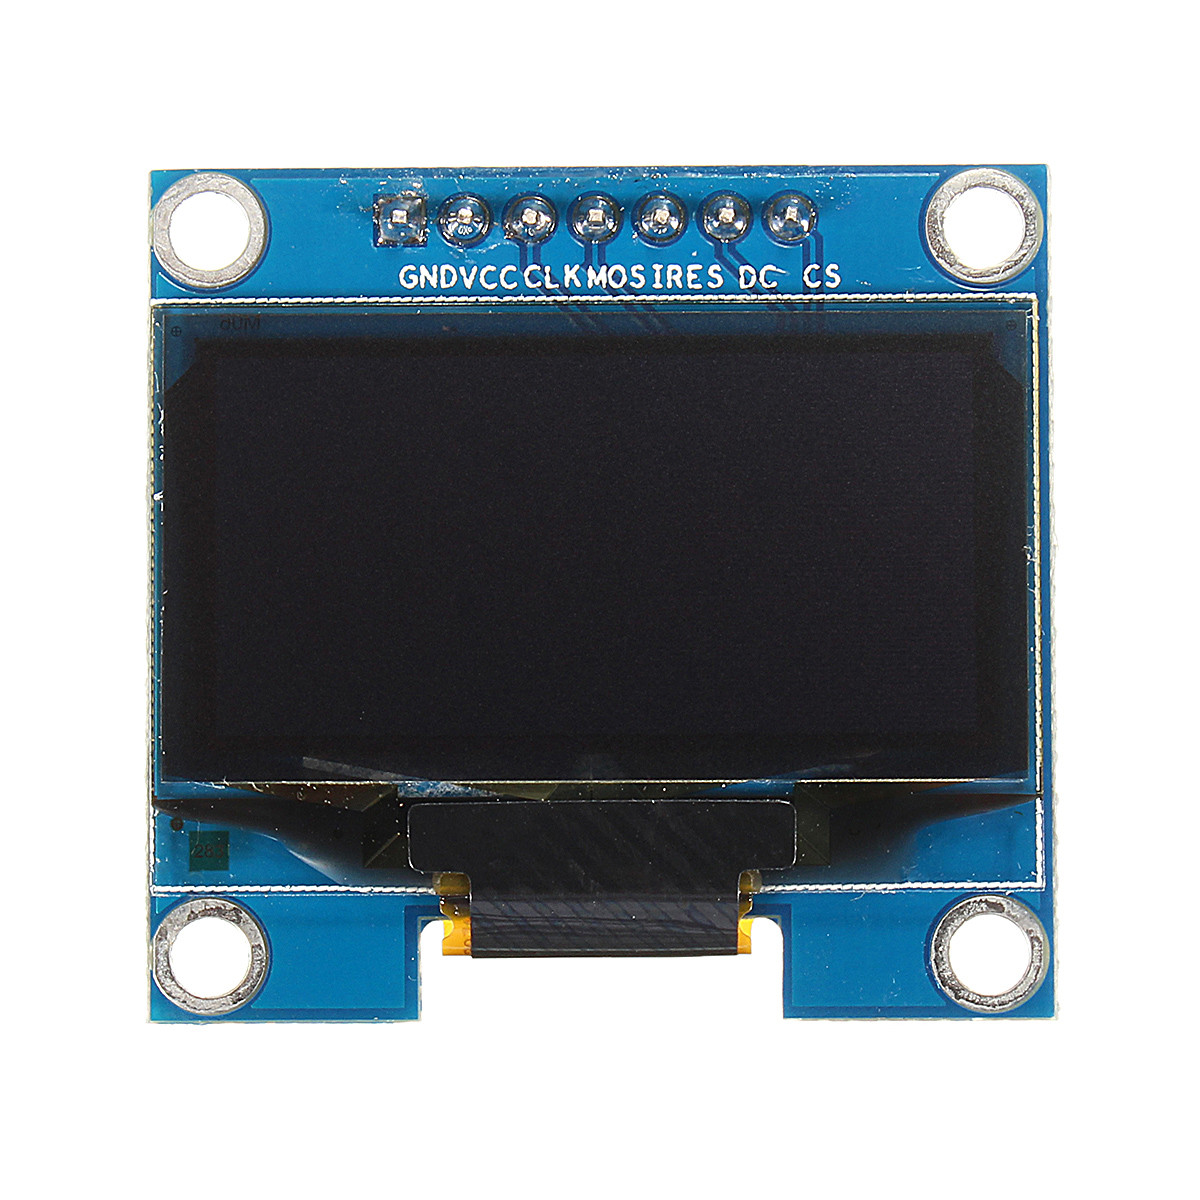 4047f1dd-5542-4485-adc3-b6395dc24006 1.3 Inch 128x64 SPI Serial OLED LCD Display Screen Module For Arduino UNO R3